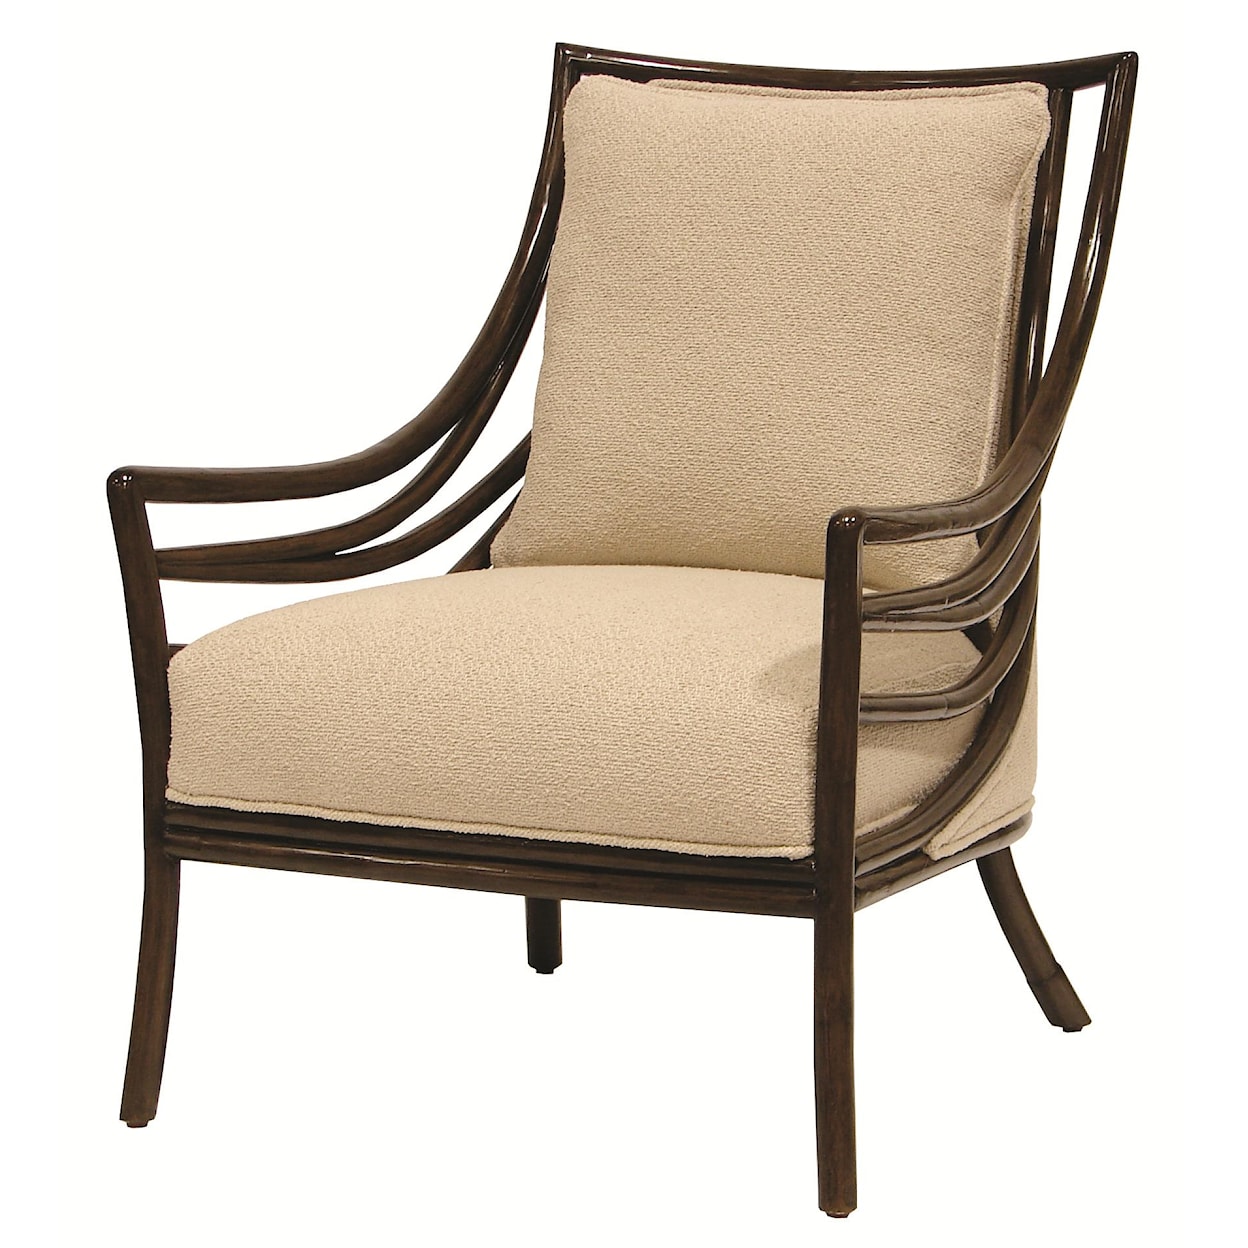 Palecek Accent Chairs by Palecek Crescent Lounge Chair